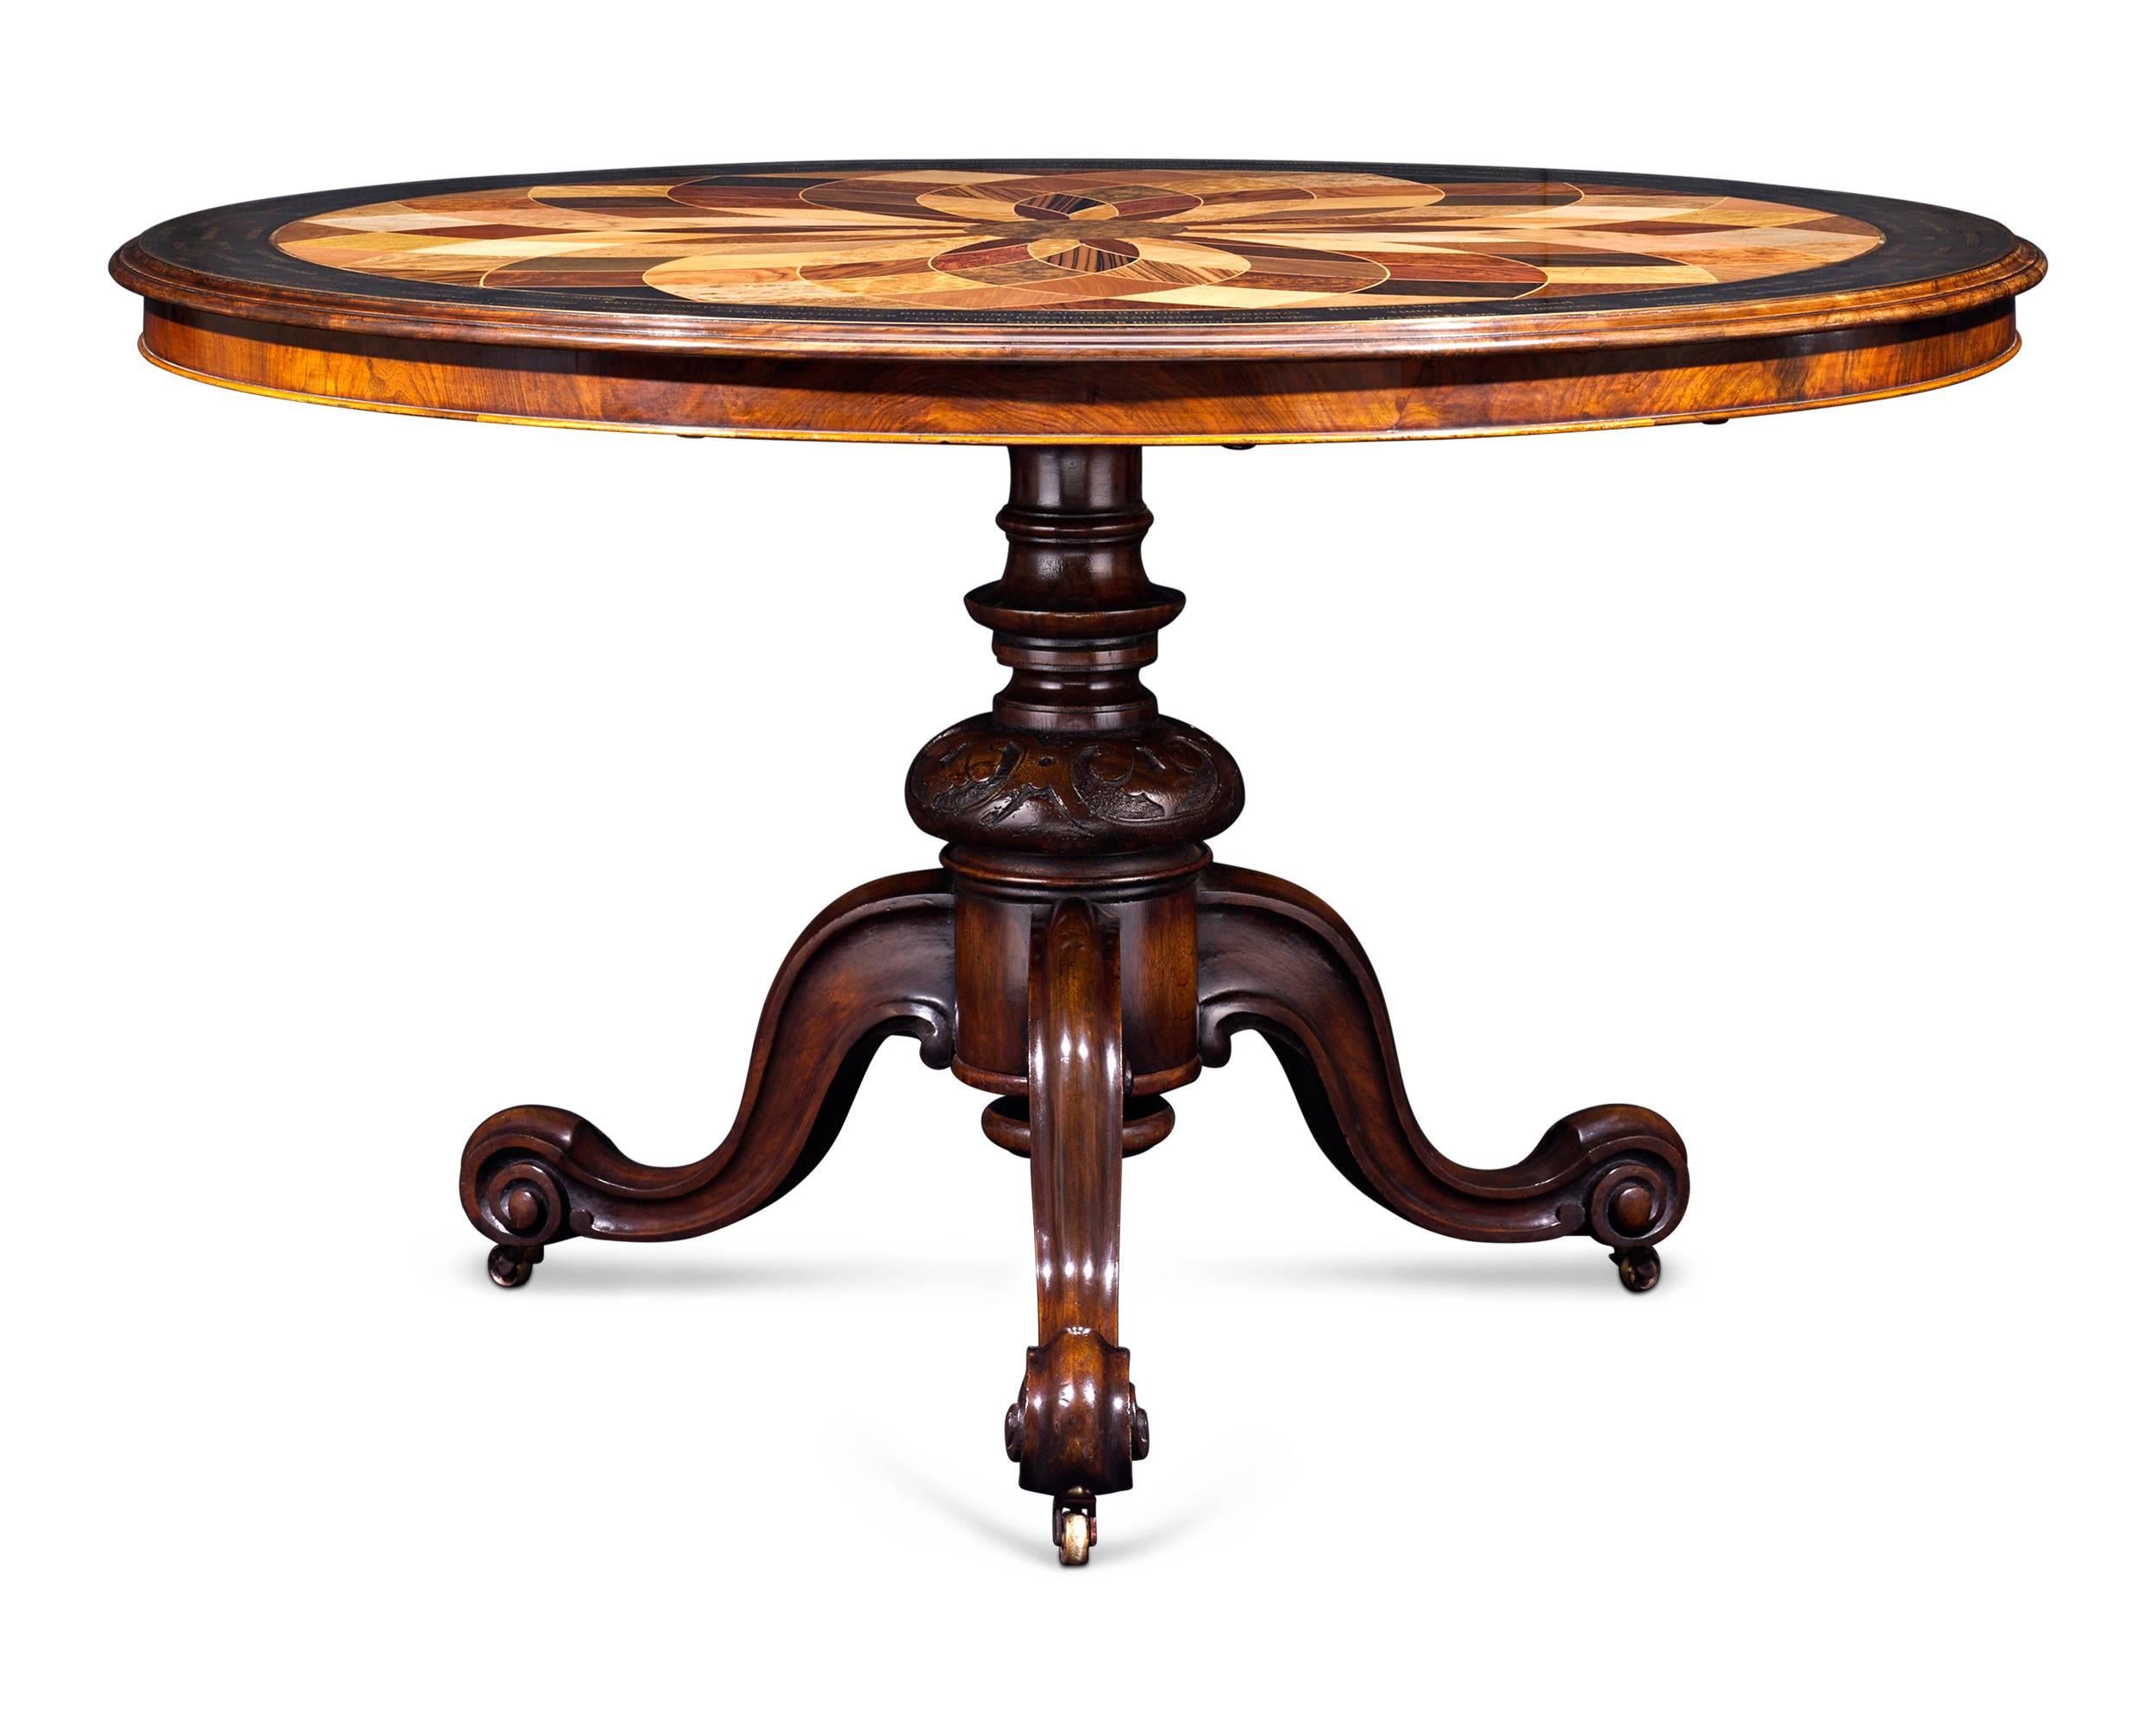 Fifty varieties of luxurious wood form the surface of this extraordinary English veneer sample table. Each specimen is inlaid into a stunning mirrored medallion design that beautifully displays its unique coloring and grain, while inlaid brass